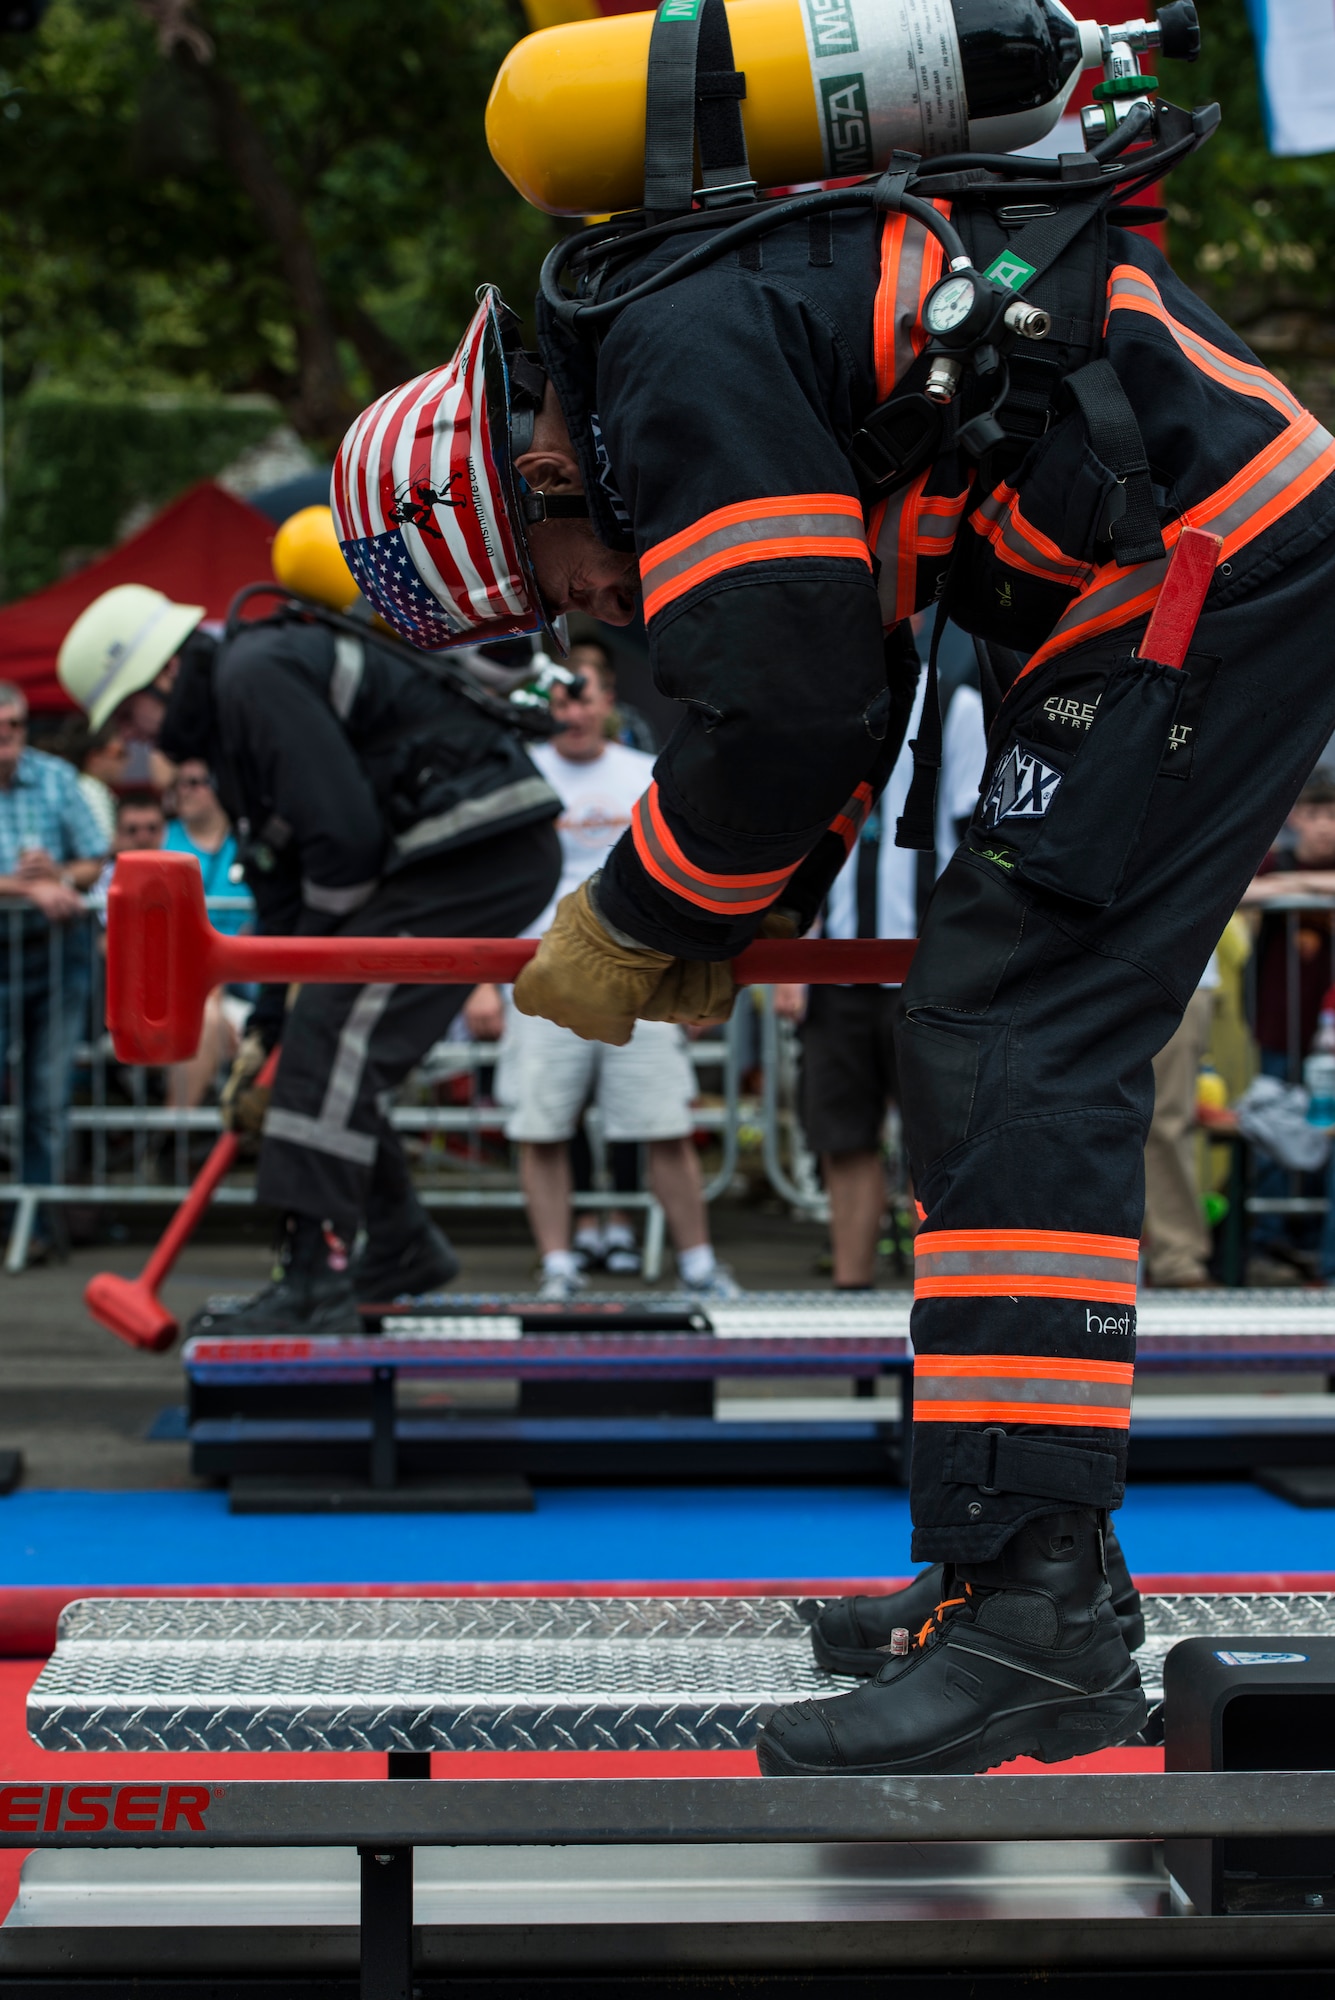 Gerd Mueller, 52nd Civil Engineer Squadron firefighter crew chief from Gransdorf, Germany, hammers the Keiser force machine during the first Mosel Firefighter Combat Challenge in Ediger-Eller, Germany, July 5, 2014. The Keiser force machine simulates hammering a hole into a burning building. (U.S. Air Force photo by Staff Sgt. Christopher Ruano/Released)